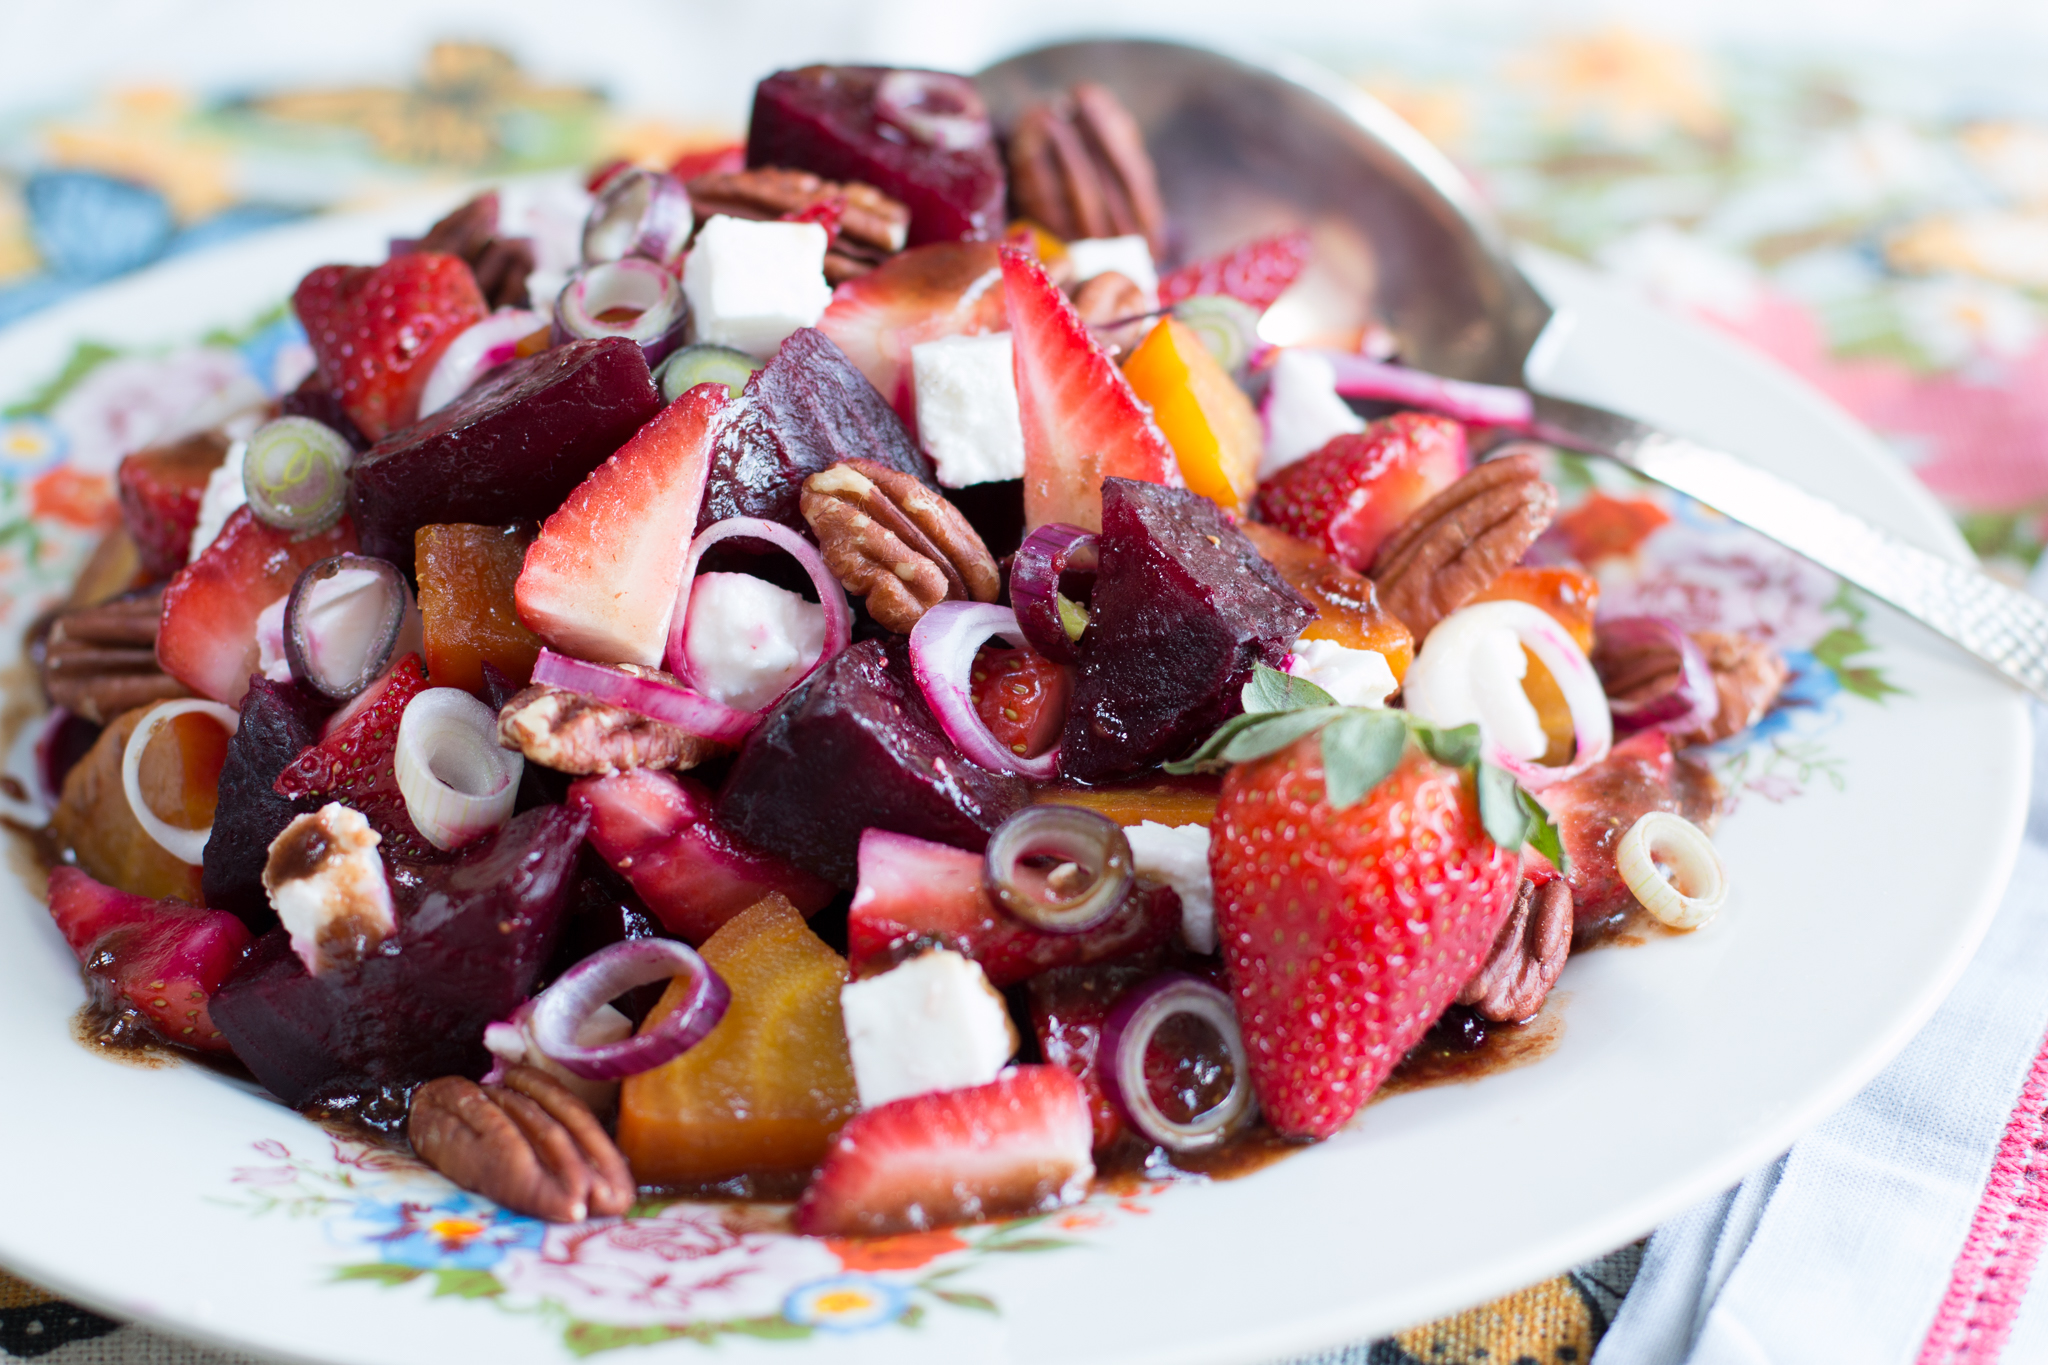 Strawberry and Beet Salad with Strawberry-Honey Balsamic Vinaigrette